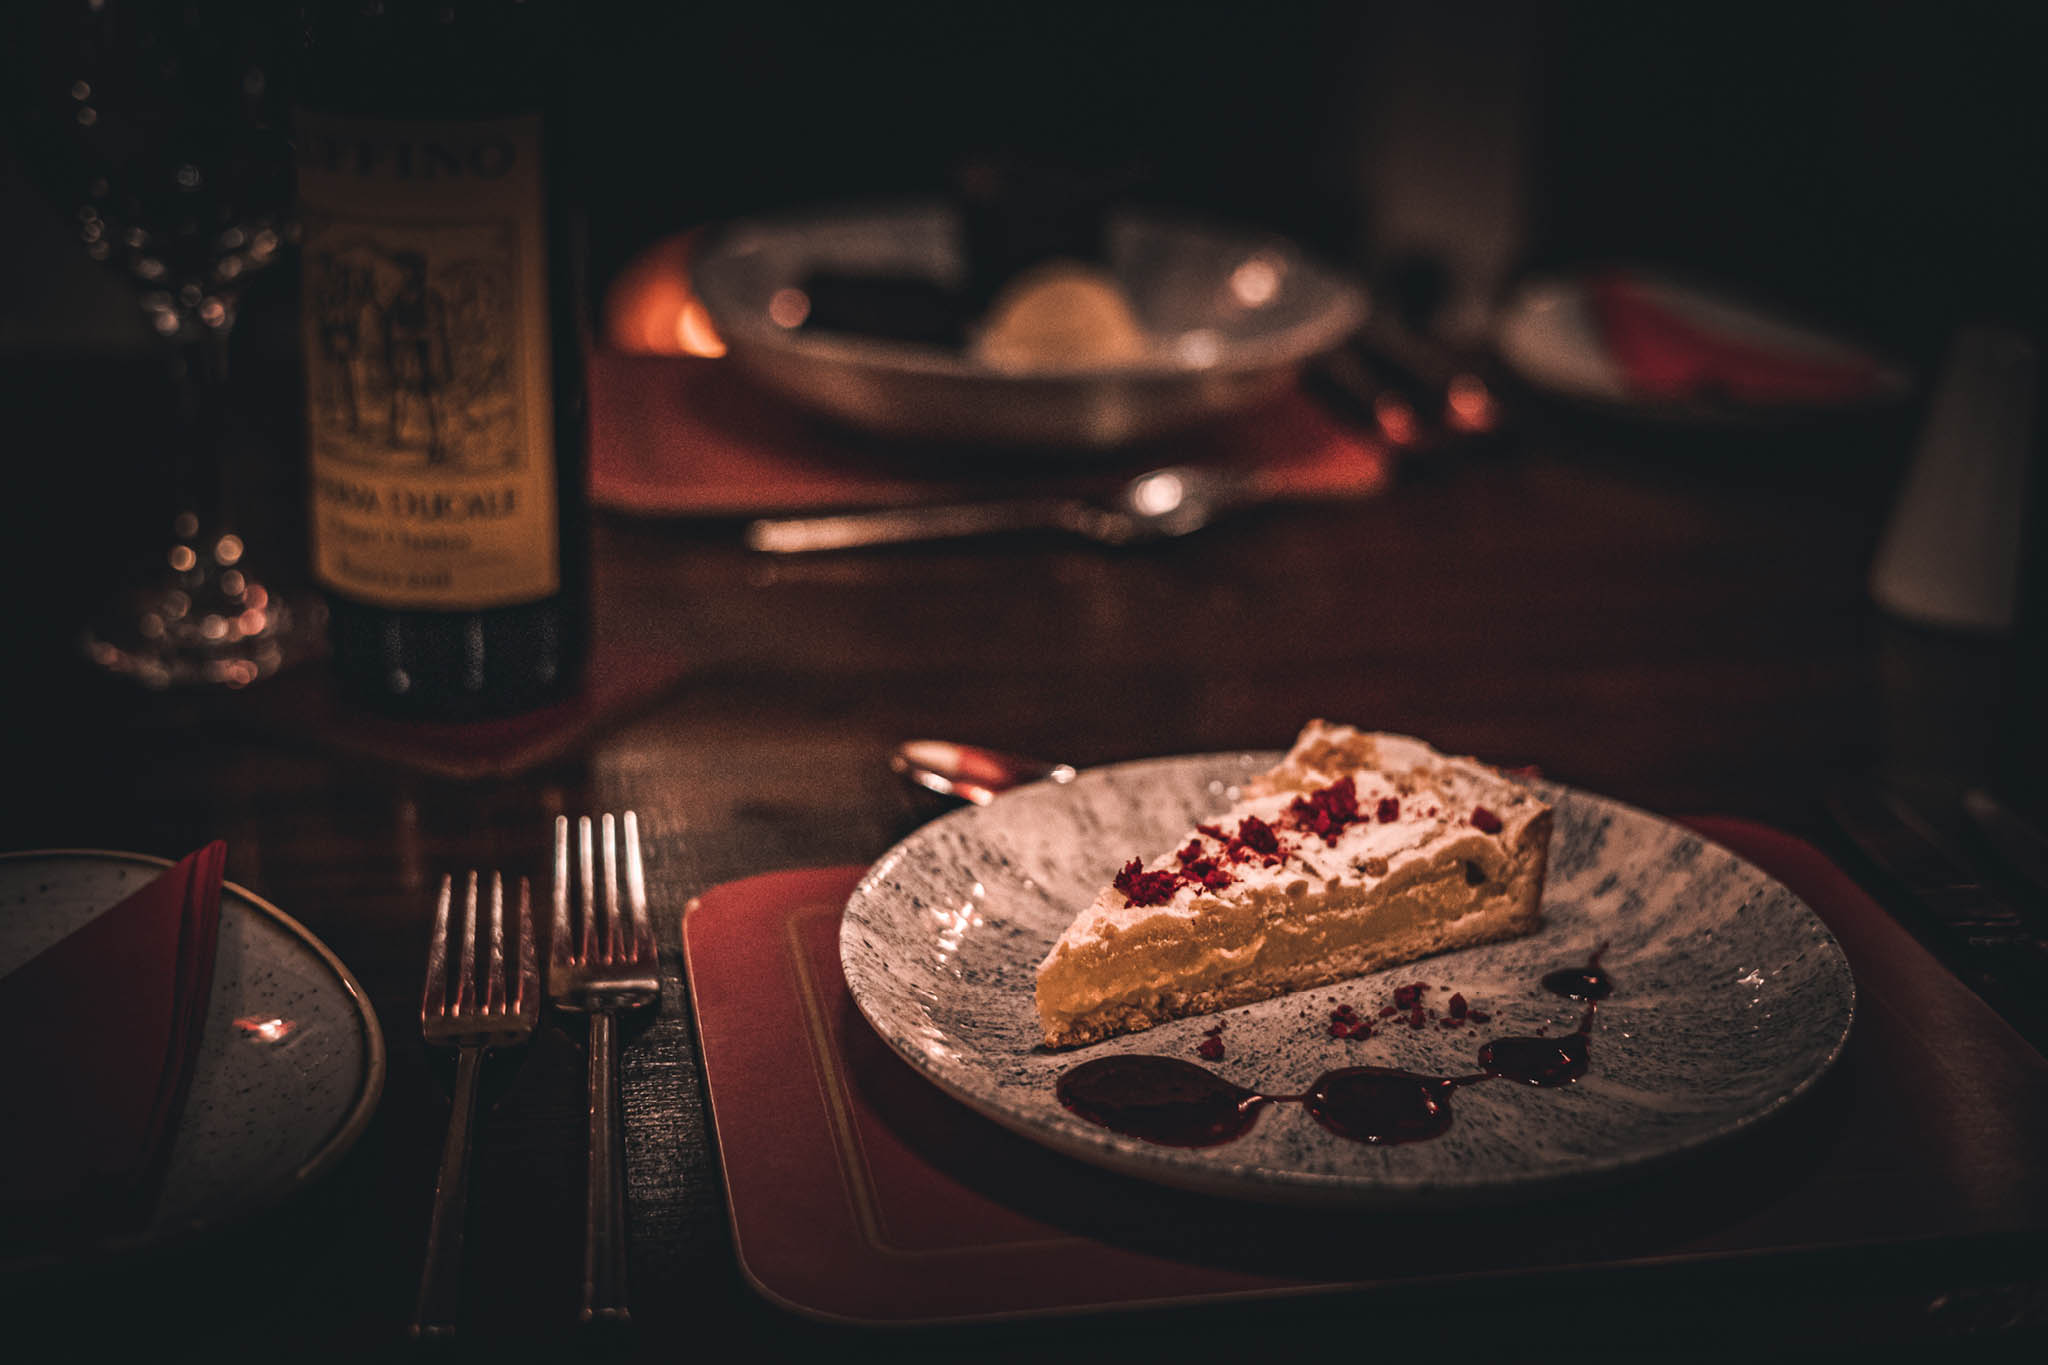 A delicious dessert served with a fine red wine